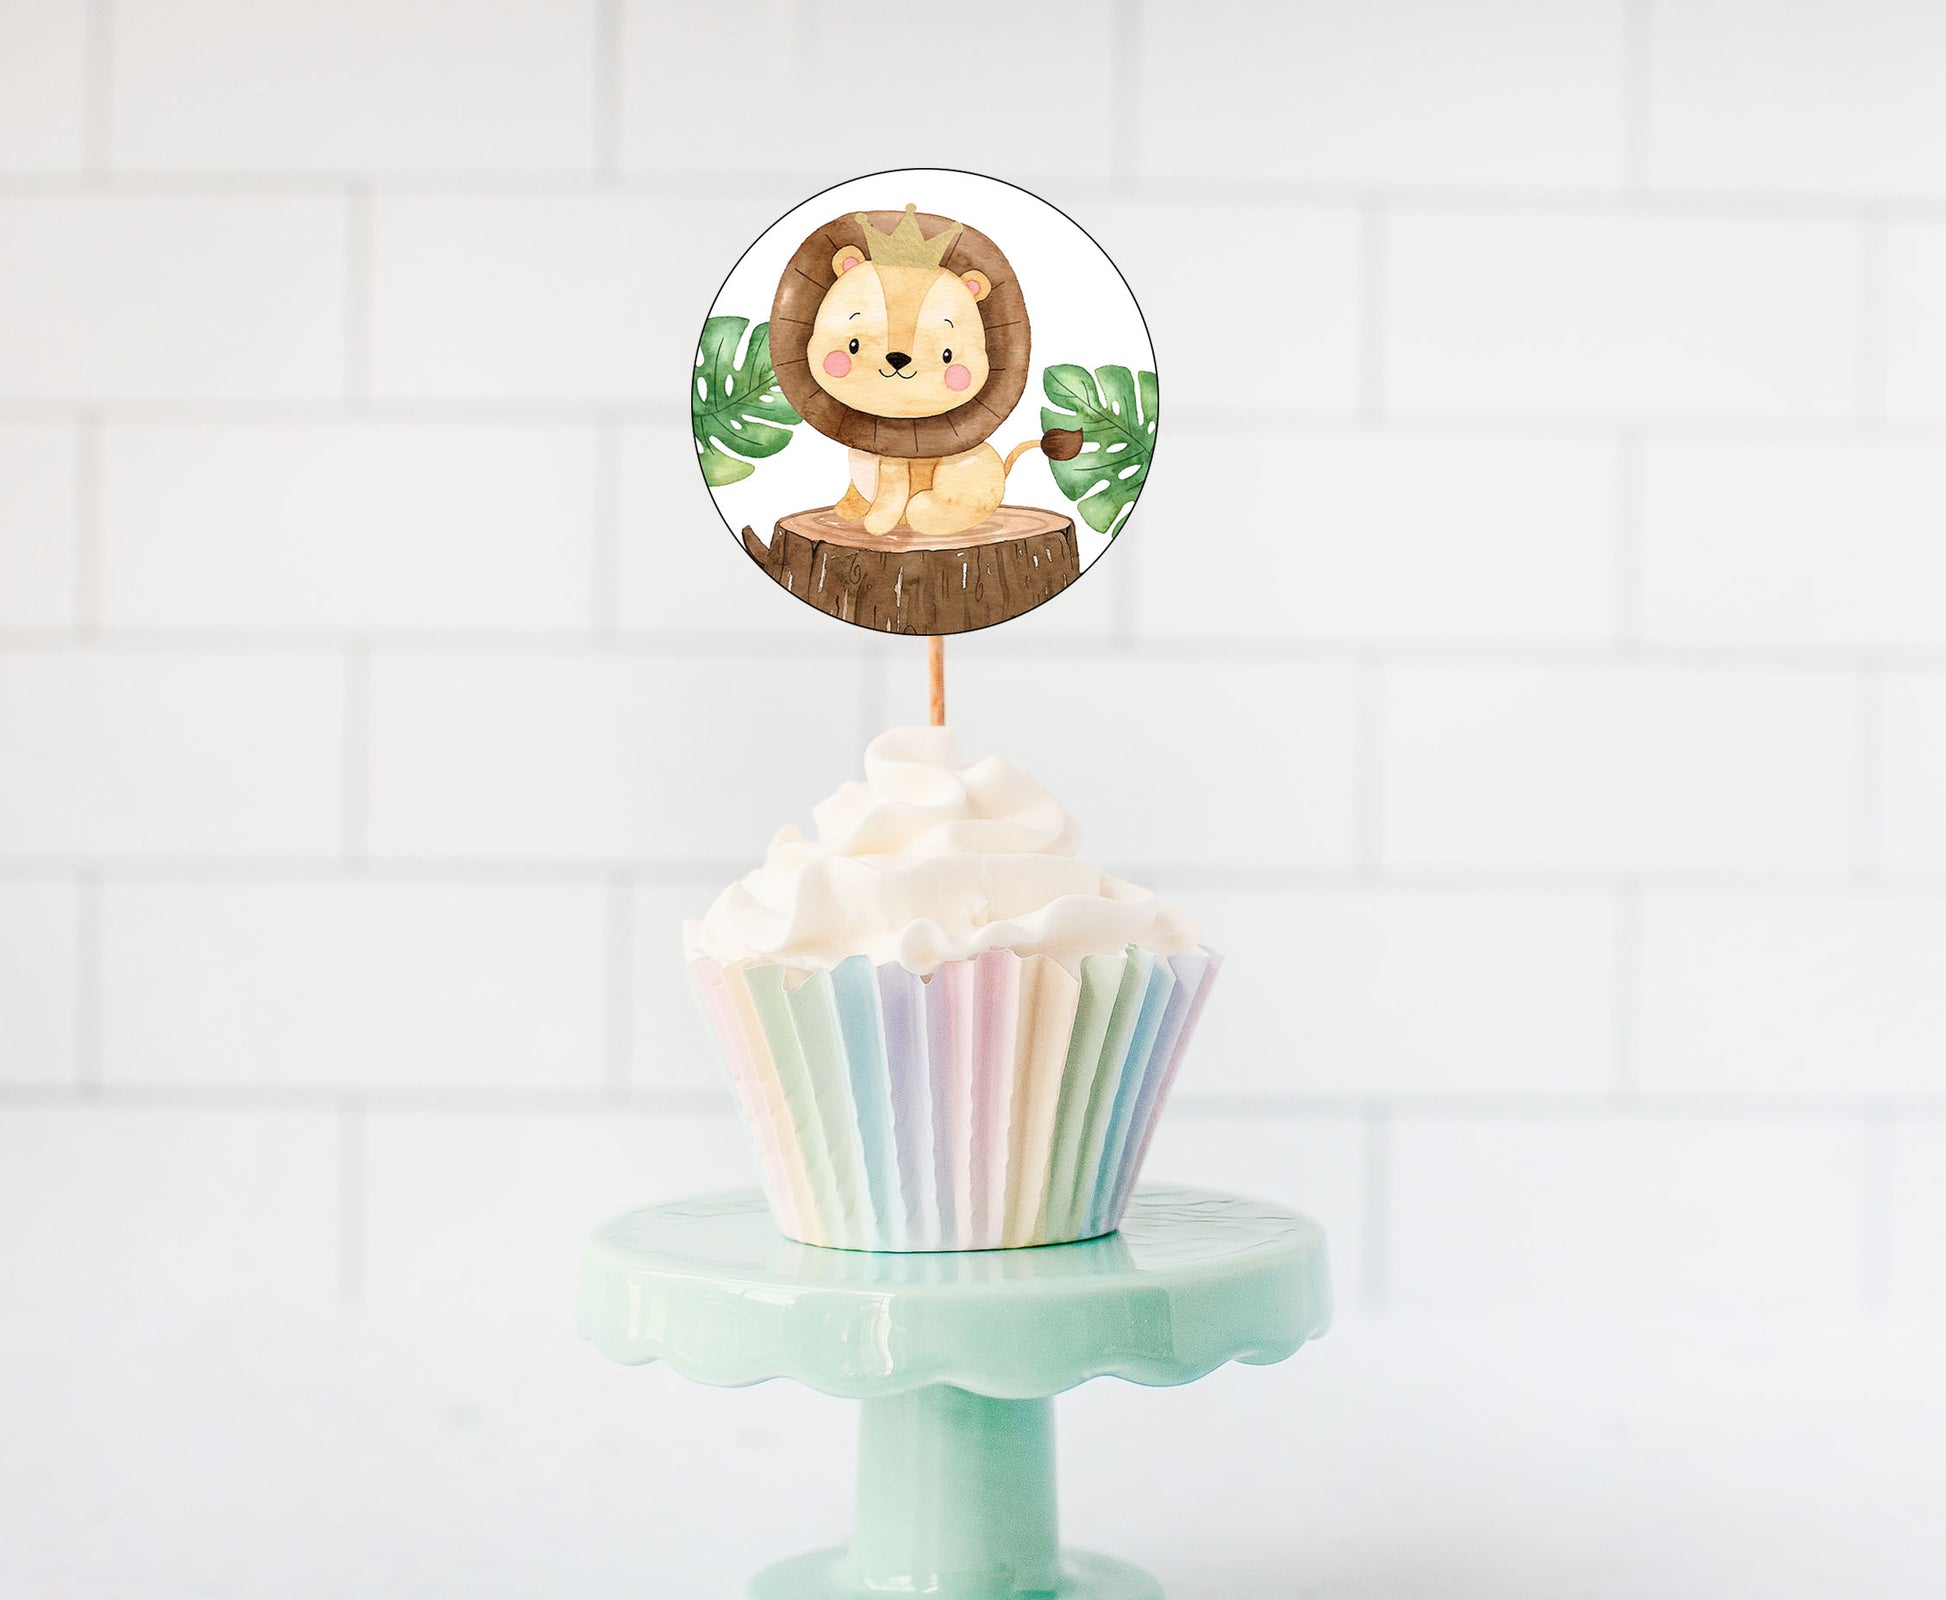 lion king baby shower cupcake toppers